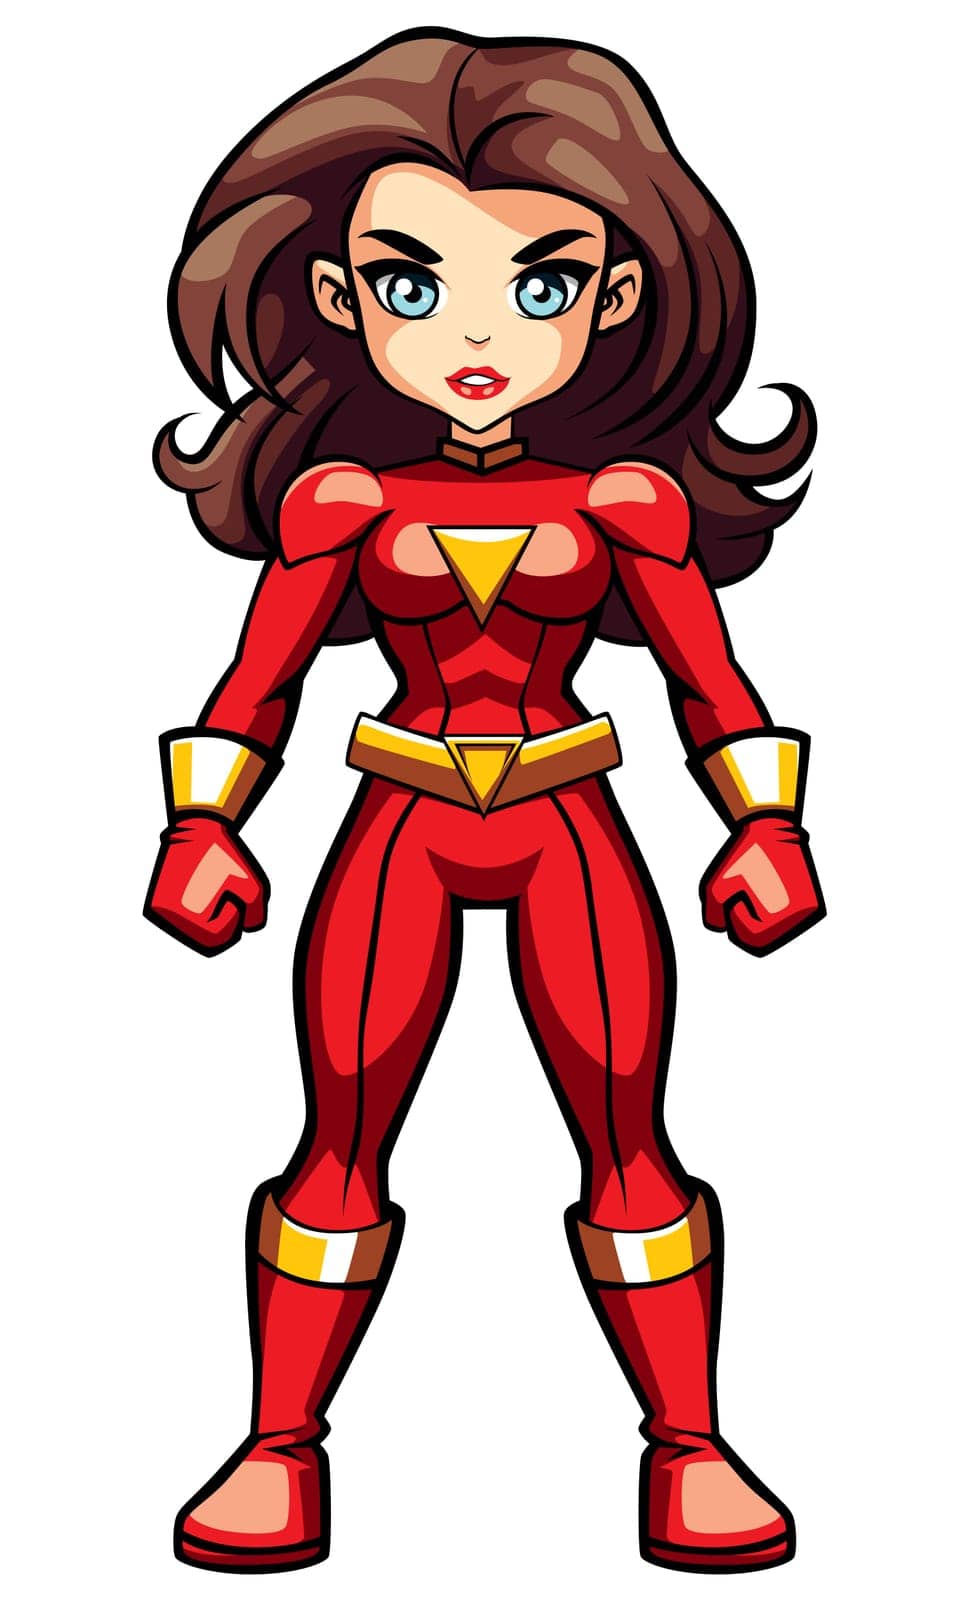 Female superhero in red costume with confident pose, vibrant and animated style.